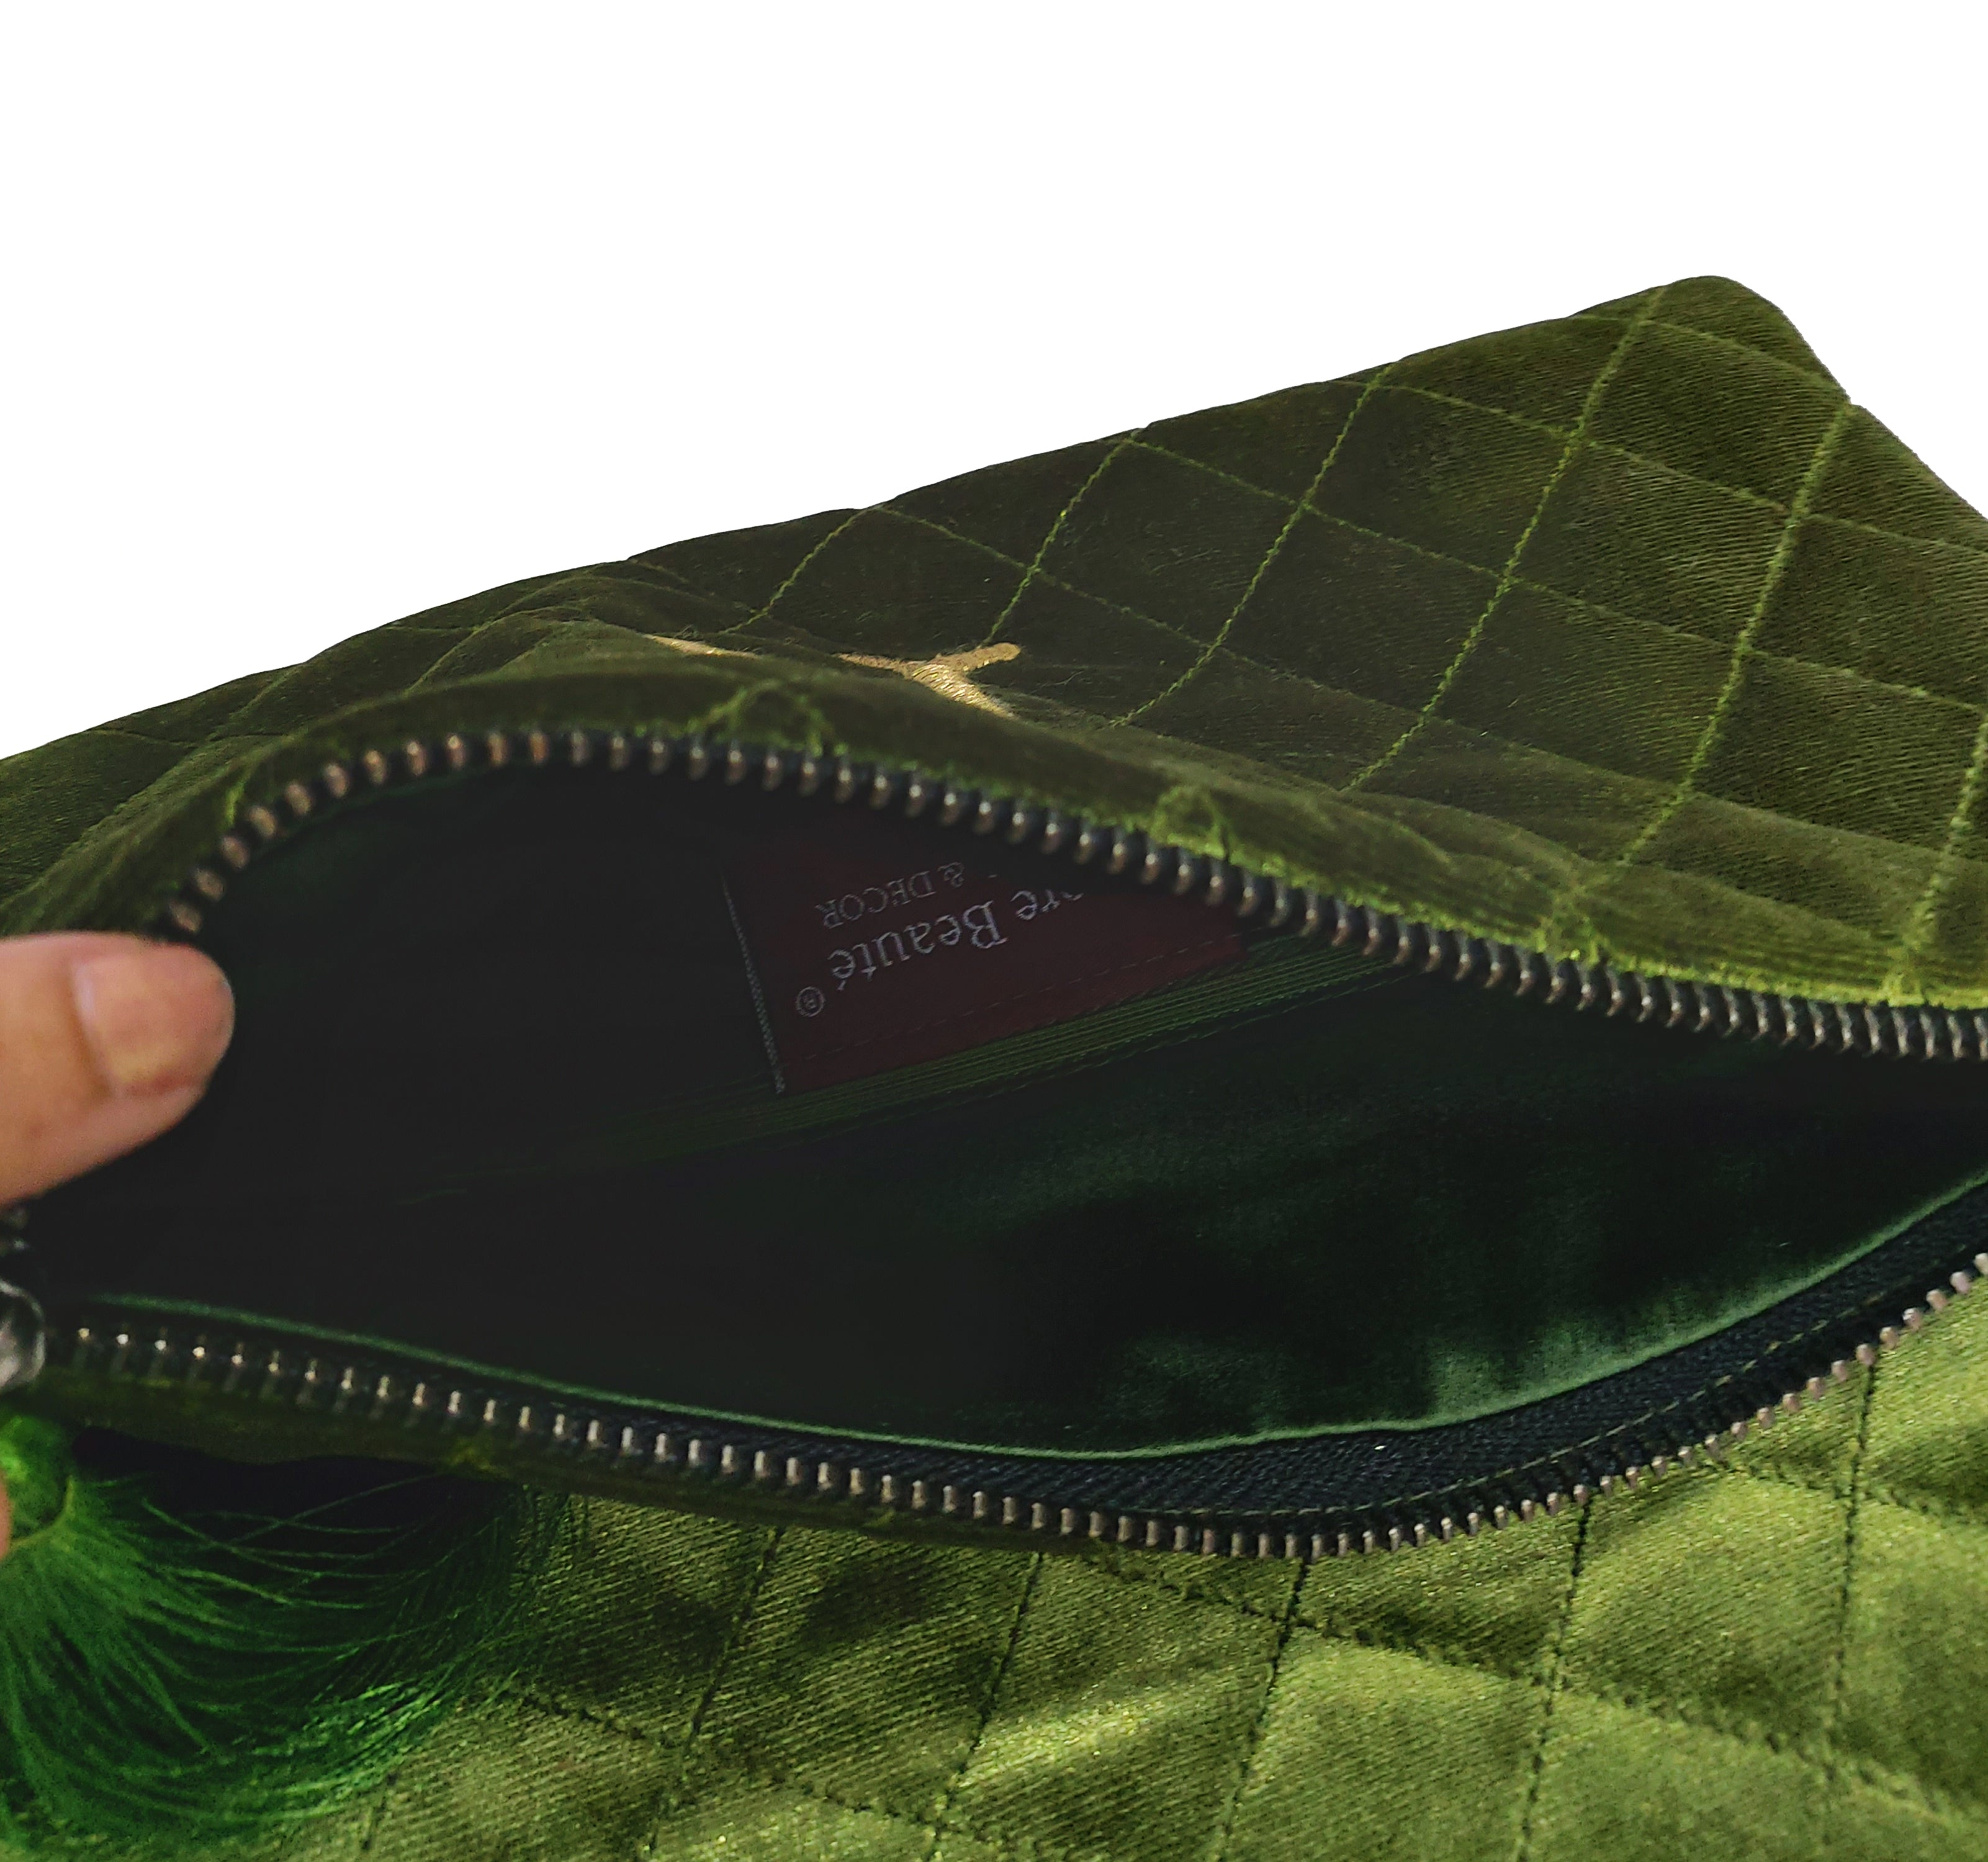 Hand Pouch Party Ladies Green Leather Clutch Purse, Rectangle at Rs 499 in  New Delhi